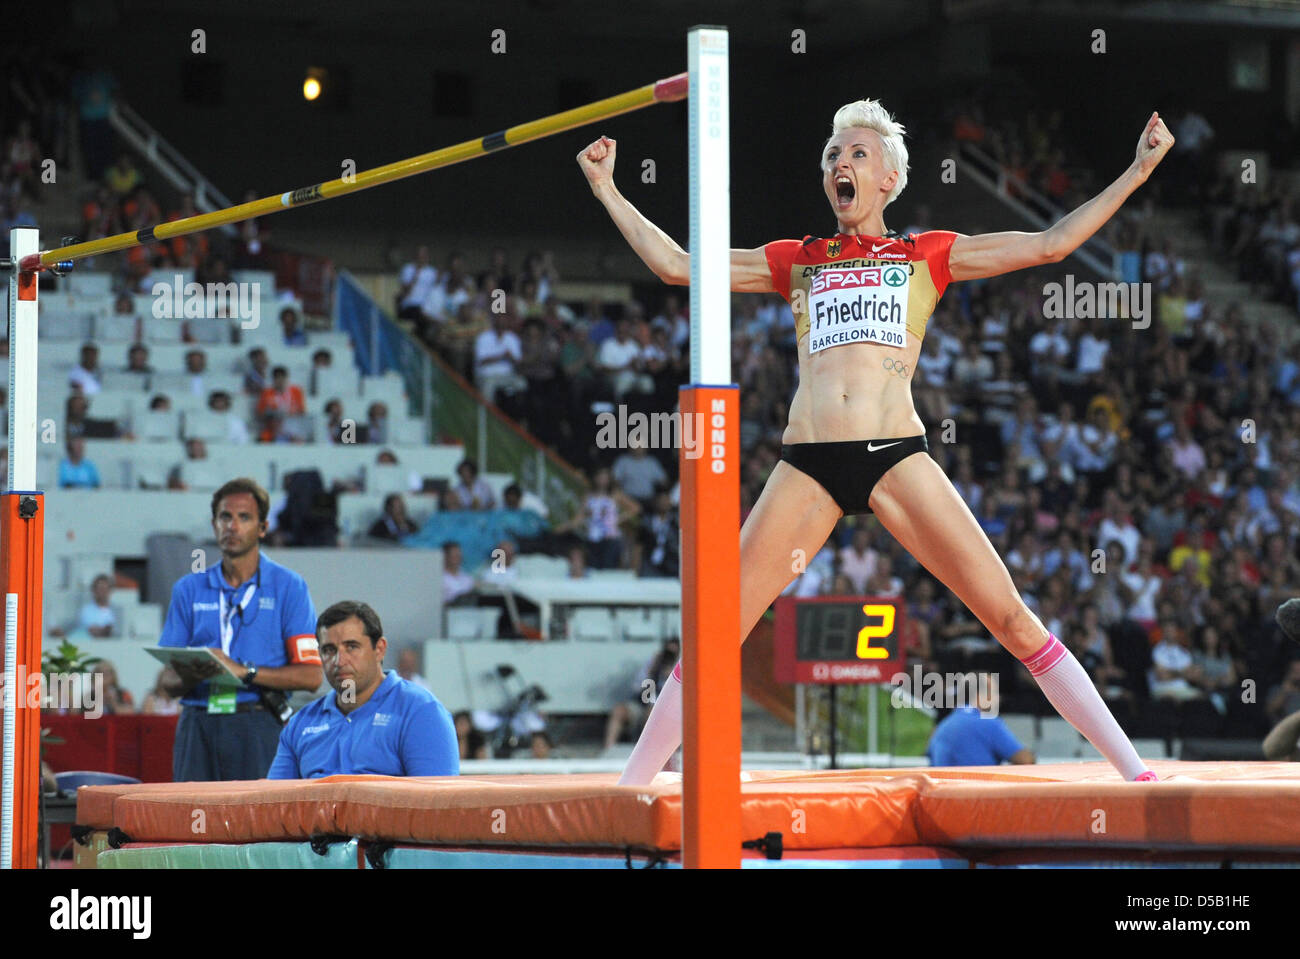 German high jumper Ariane Friedrich leaps up in joy after winning the bronze medal in the women's high jump competition at the European Athletics Championships in Barcelona, Spain, 01 August 2010. Photo: Rainer Jensen Stock Photo